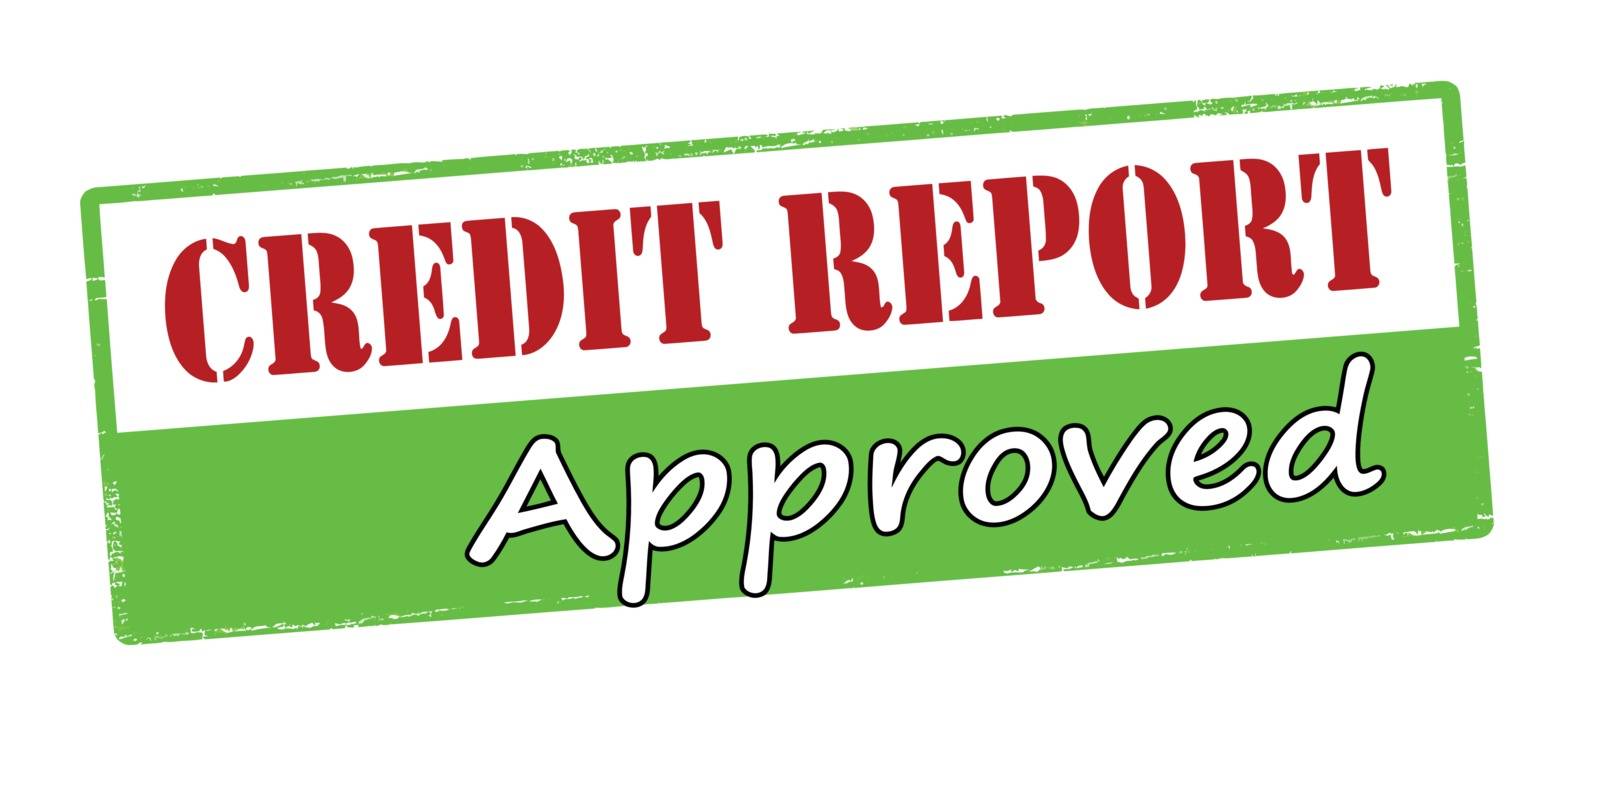 Credit report approved by carmenbobo